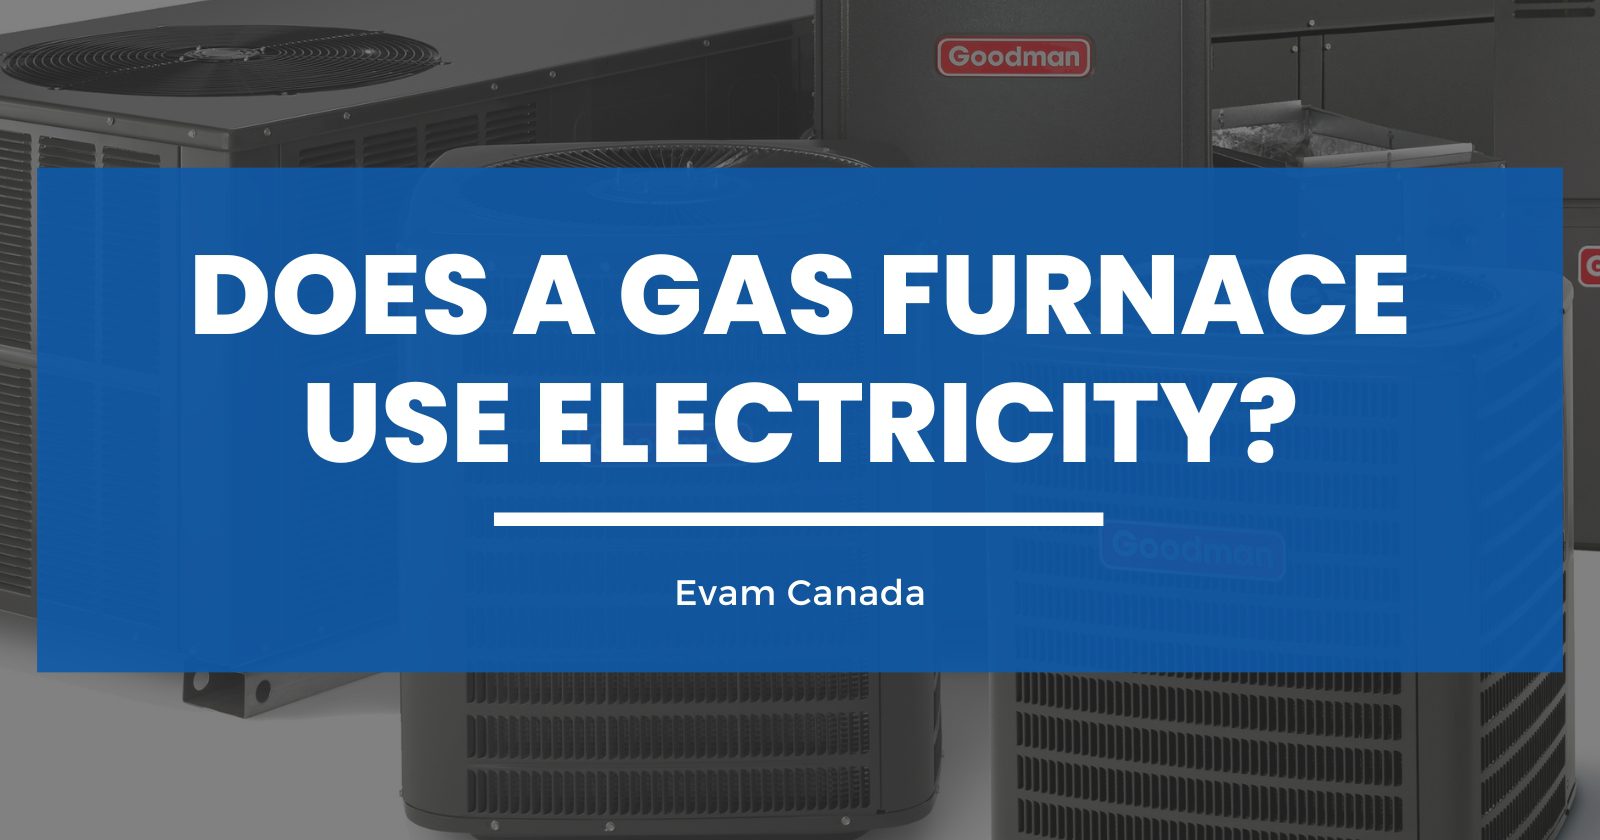 Does a Gas Furnace Use Electricity?